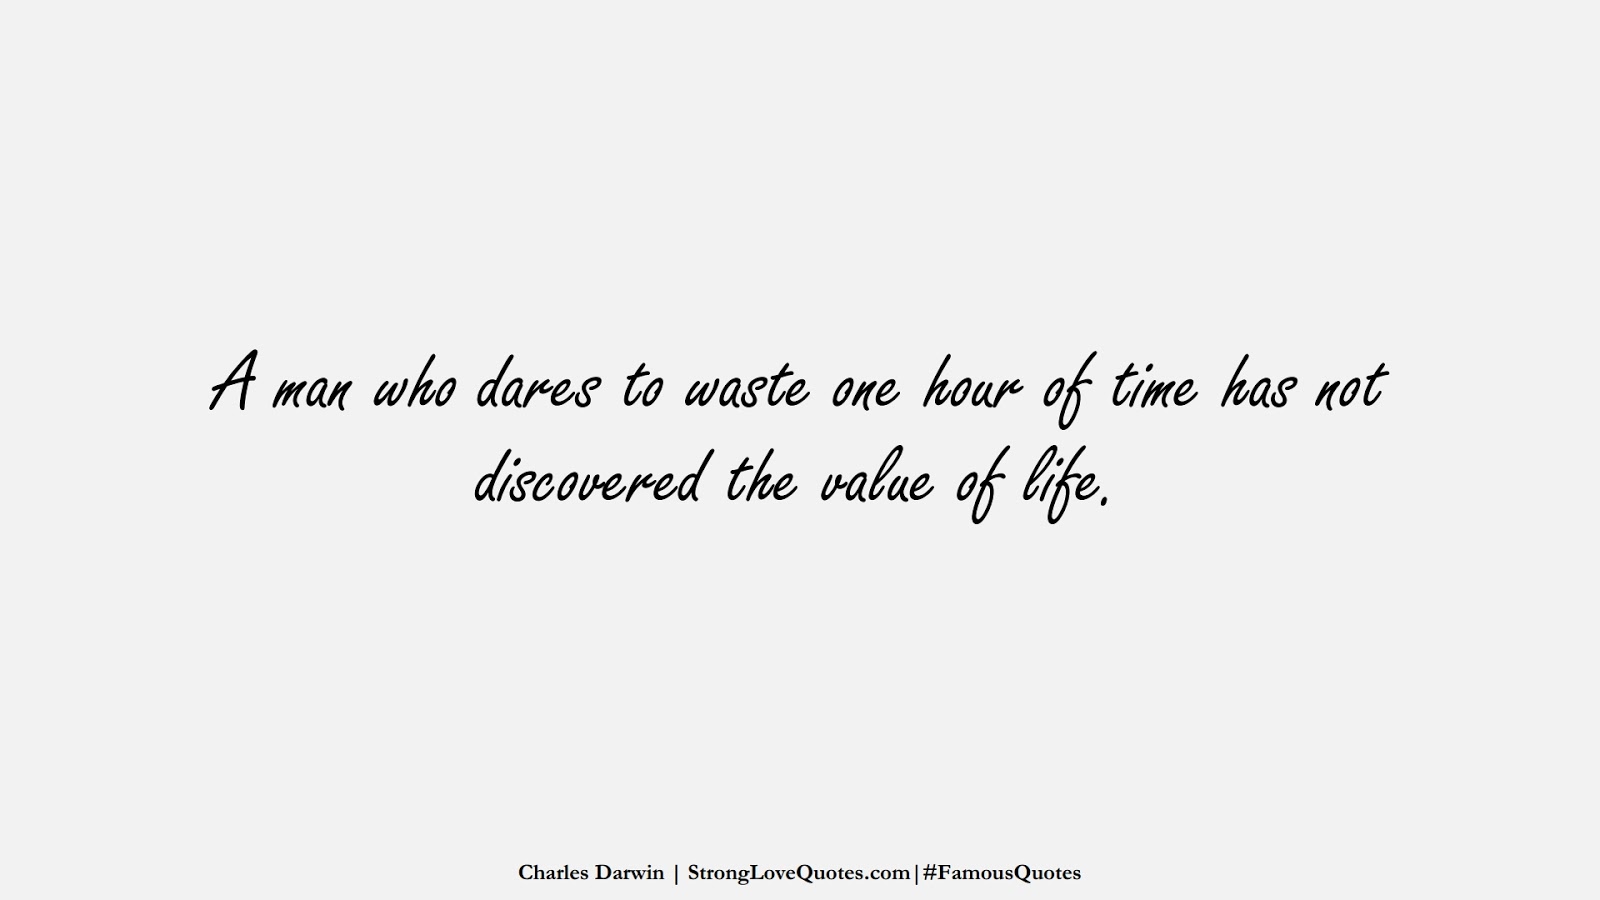 A man who dares to waste one hour of time has not discovered the value of life. (Charles Darwin);  #FamousQuotes